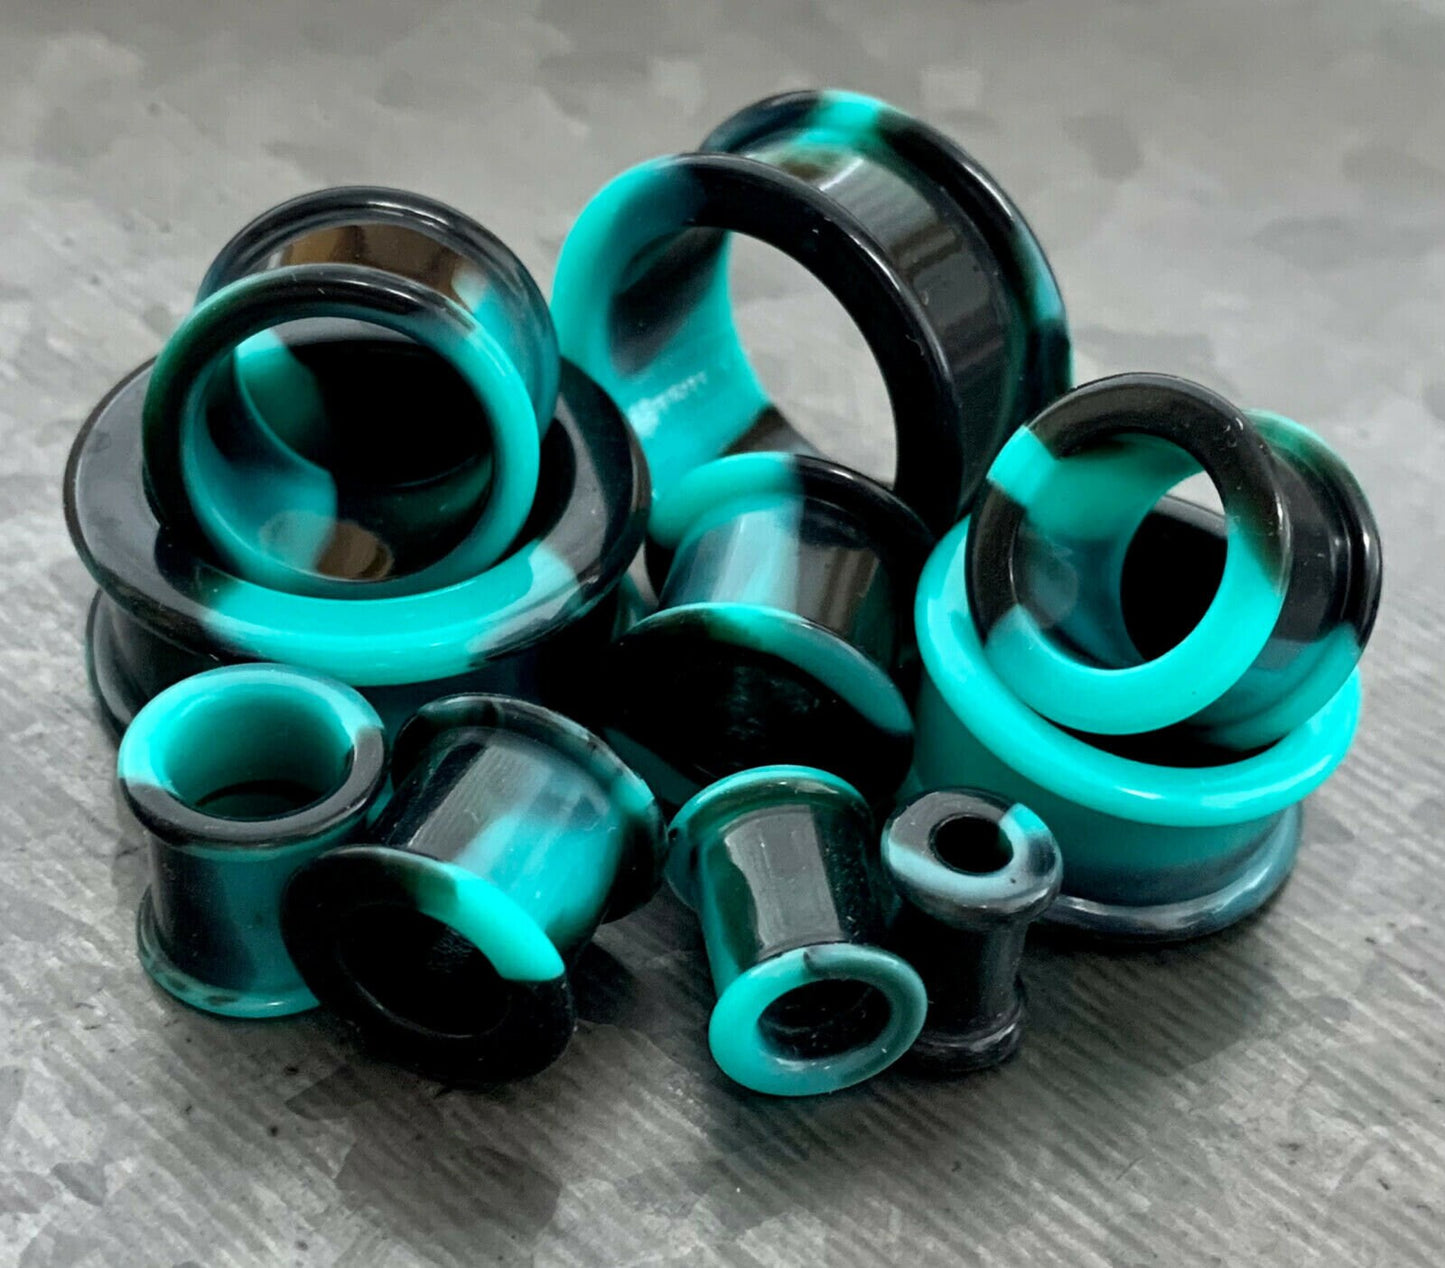 PAIR of Beautiful Teal & Black Swirl Galaxy Silicone Double Flare Tunnel/Plugs - Gauges 2g (6.5mm) up to 2" (50mm) available!